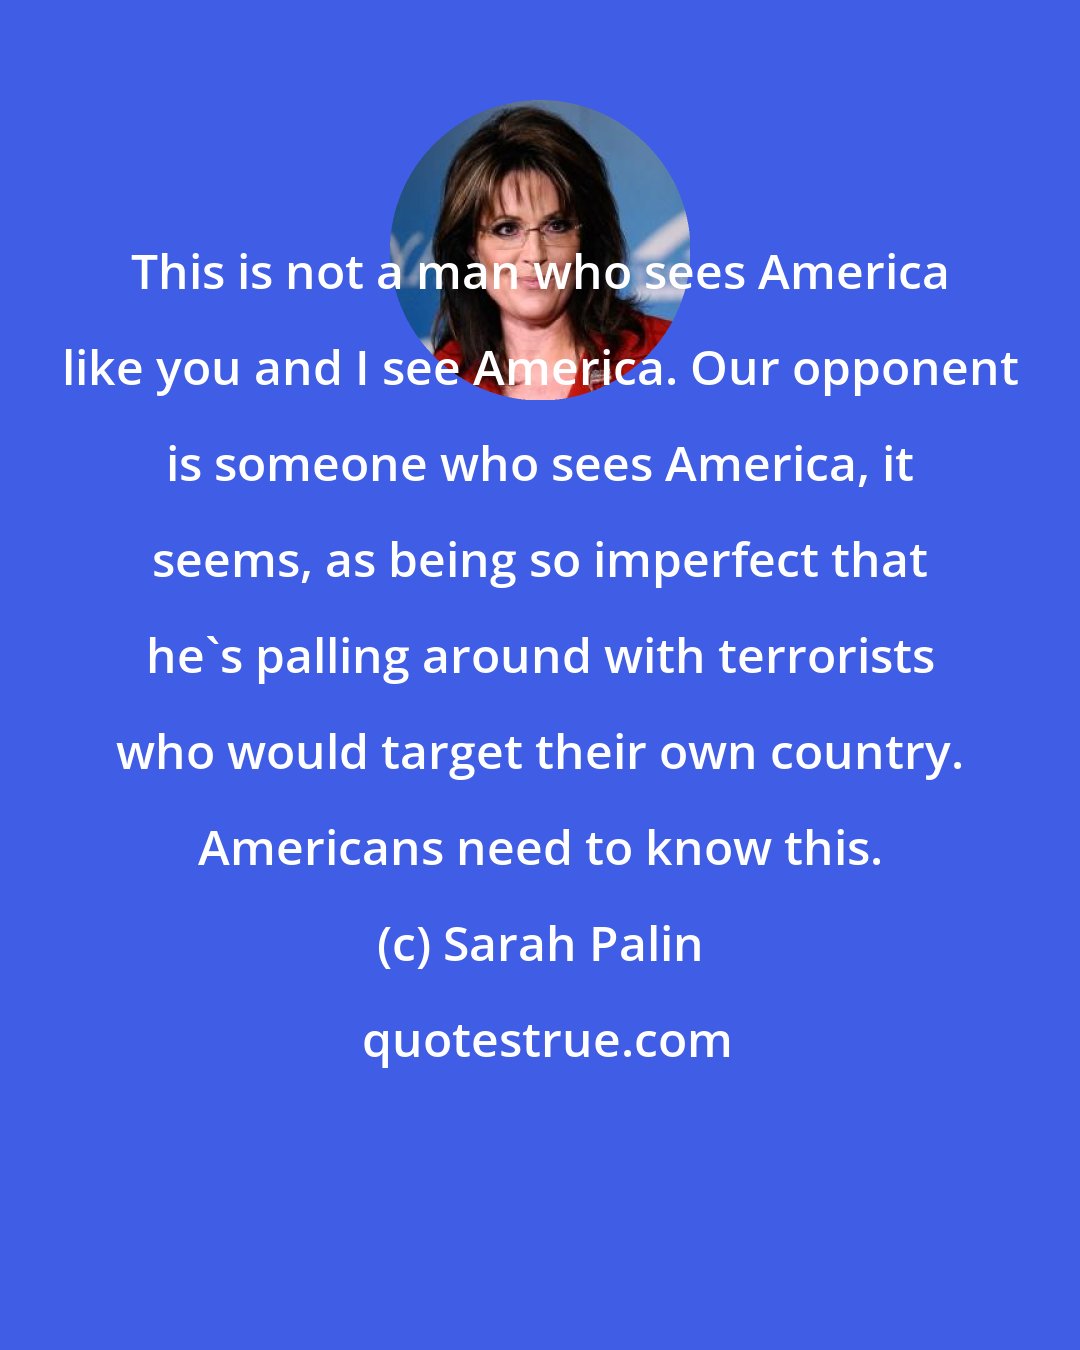 Sarah Palin: This is not a man who sees America like you and I see America. Our opponent is someone who sees America, it seems, as being so imperfect that he's palling around with terrorists who would target their own country. Americans need to know this.